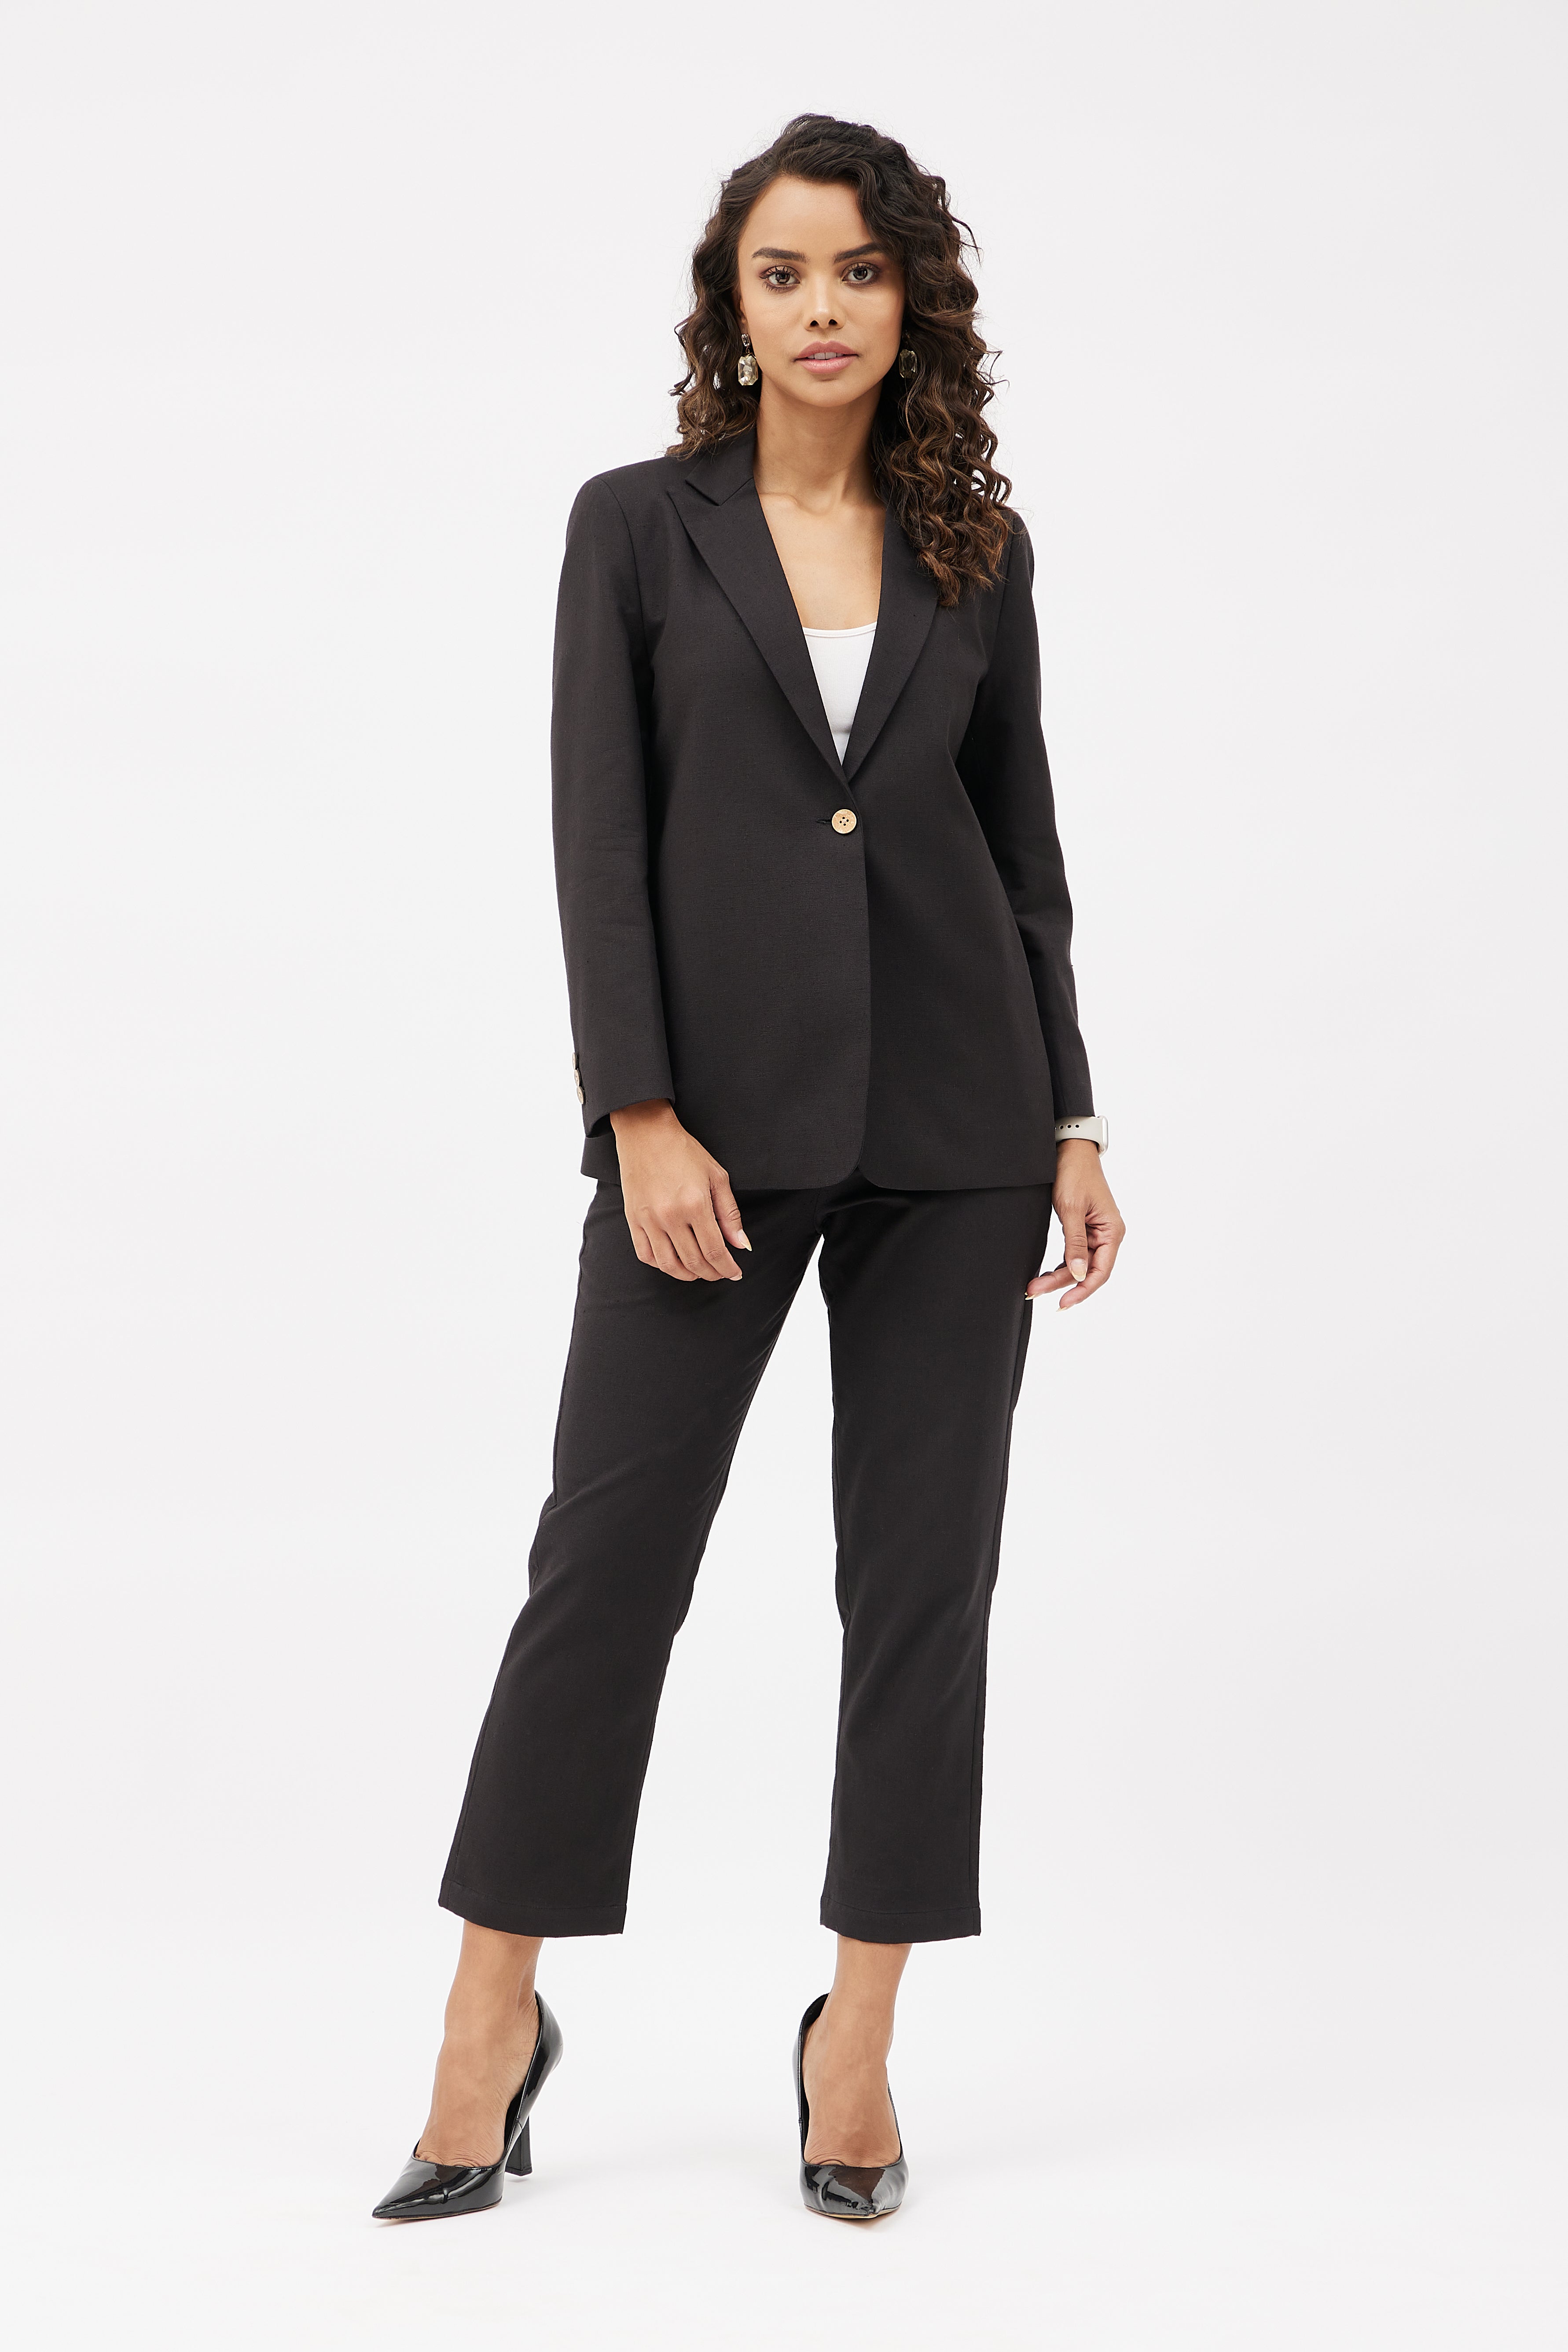 10 Ways To Wear Women's Trouser Suits And Feel Confident AF | Work outfits  women, Ladies trouser suits, Stylish suit